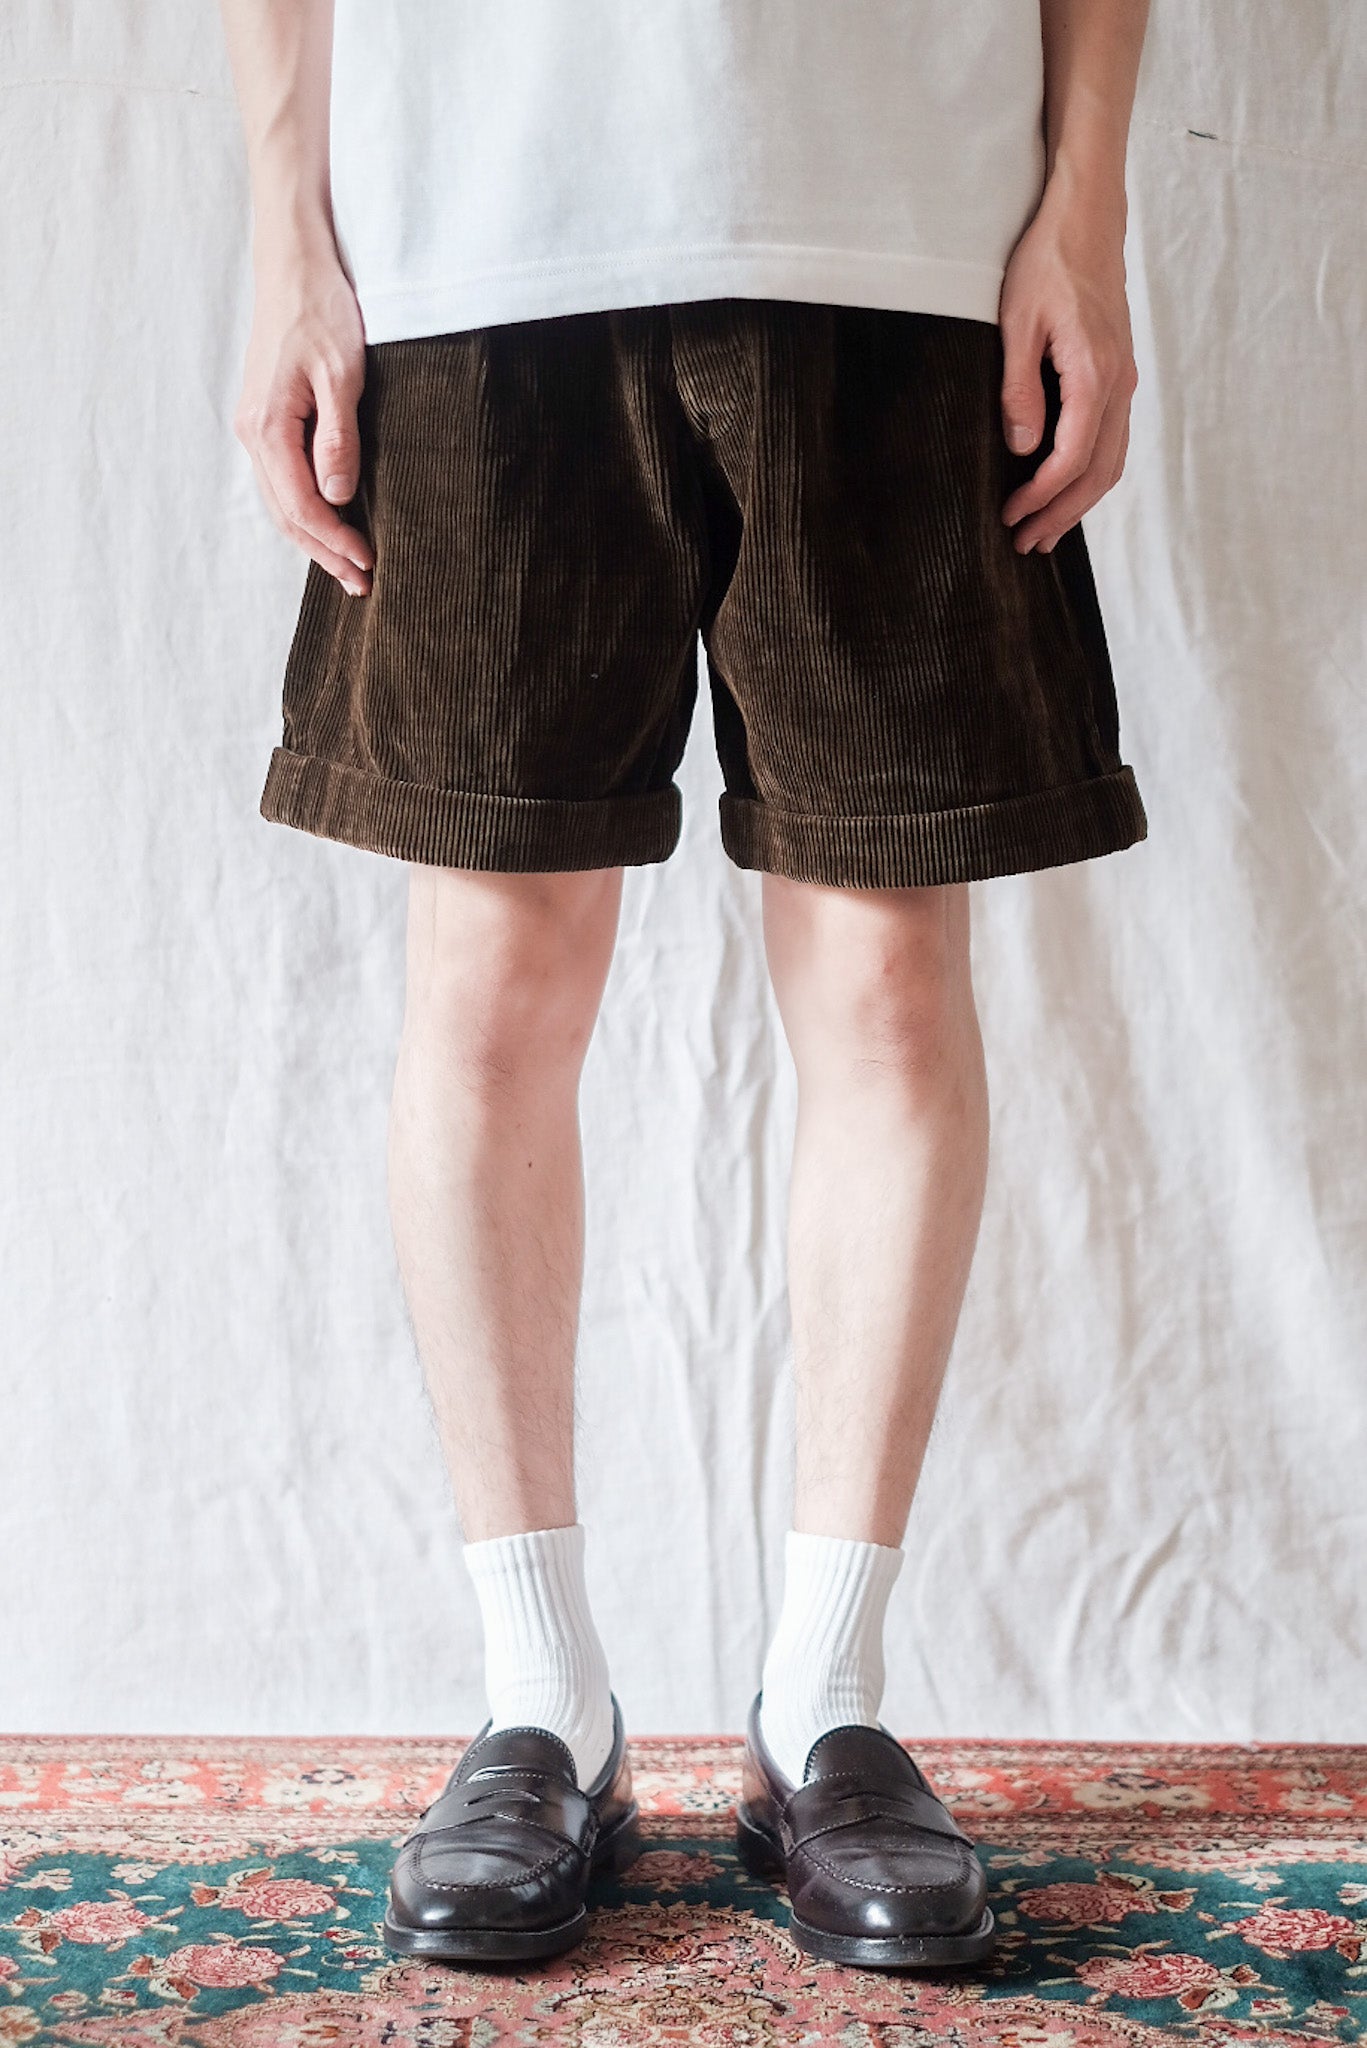 [~ 40's] French Vintage Brown Corduroy Work Shorts